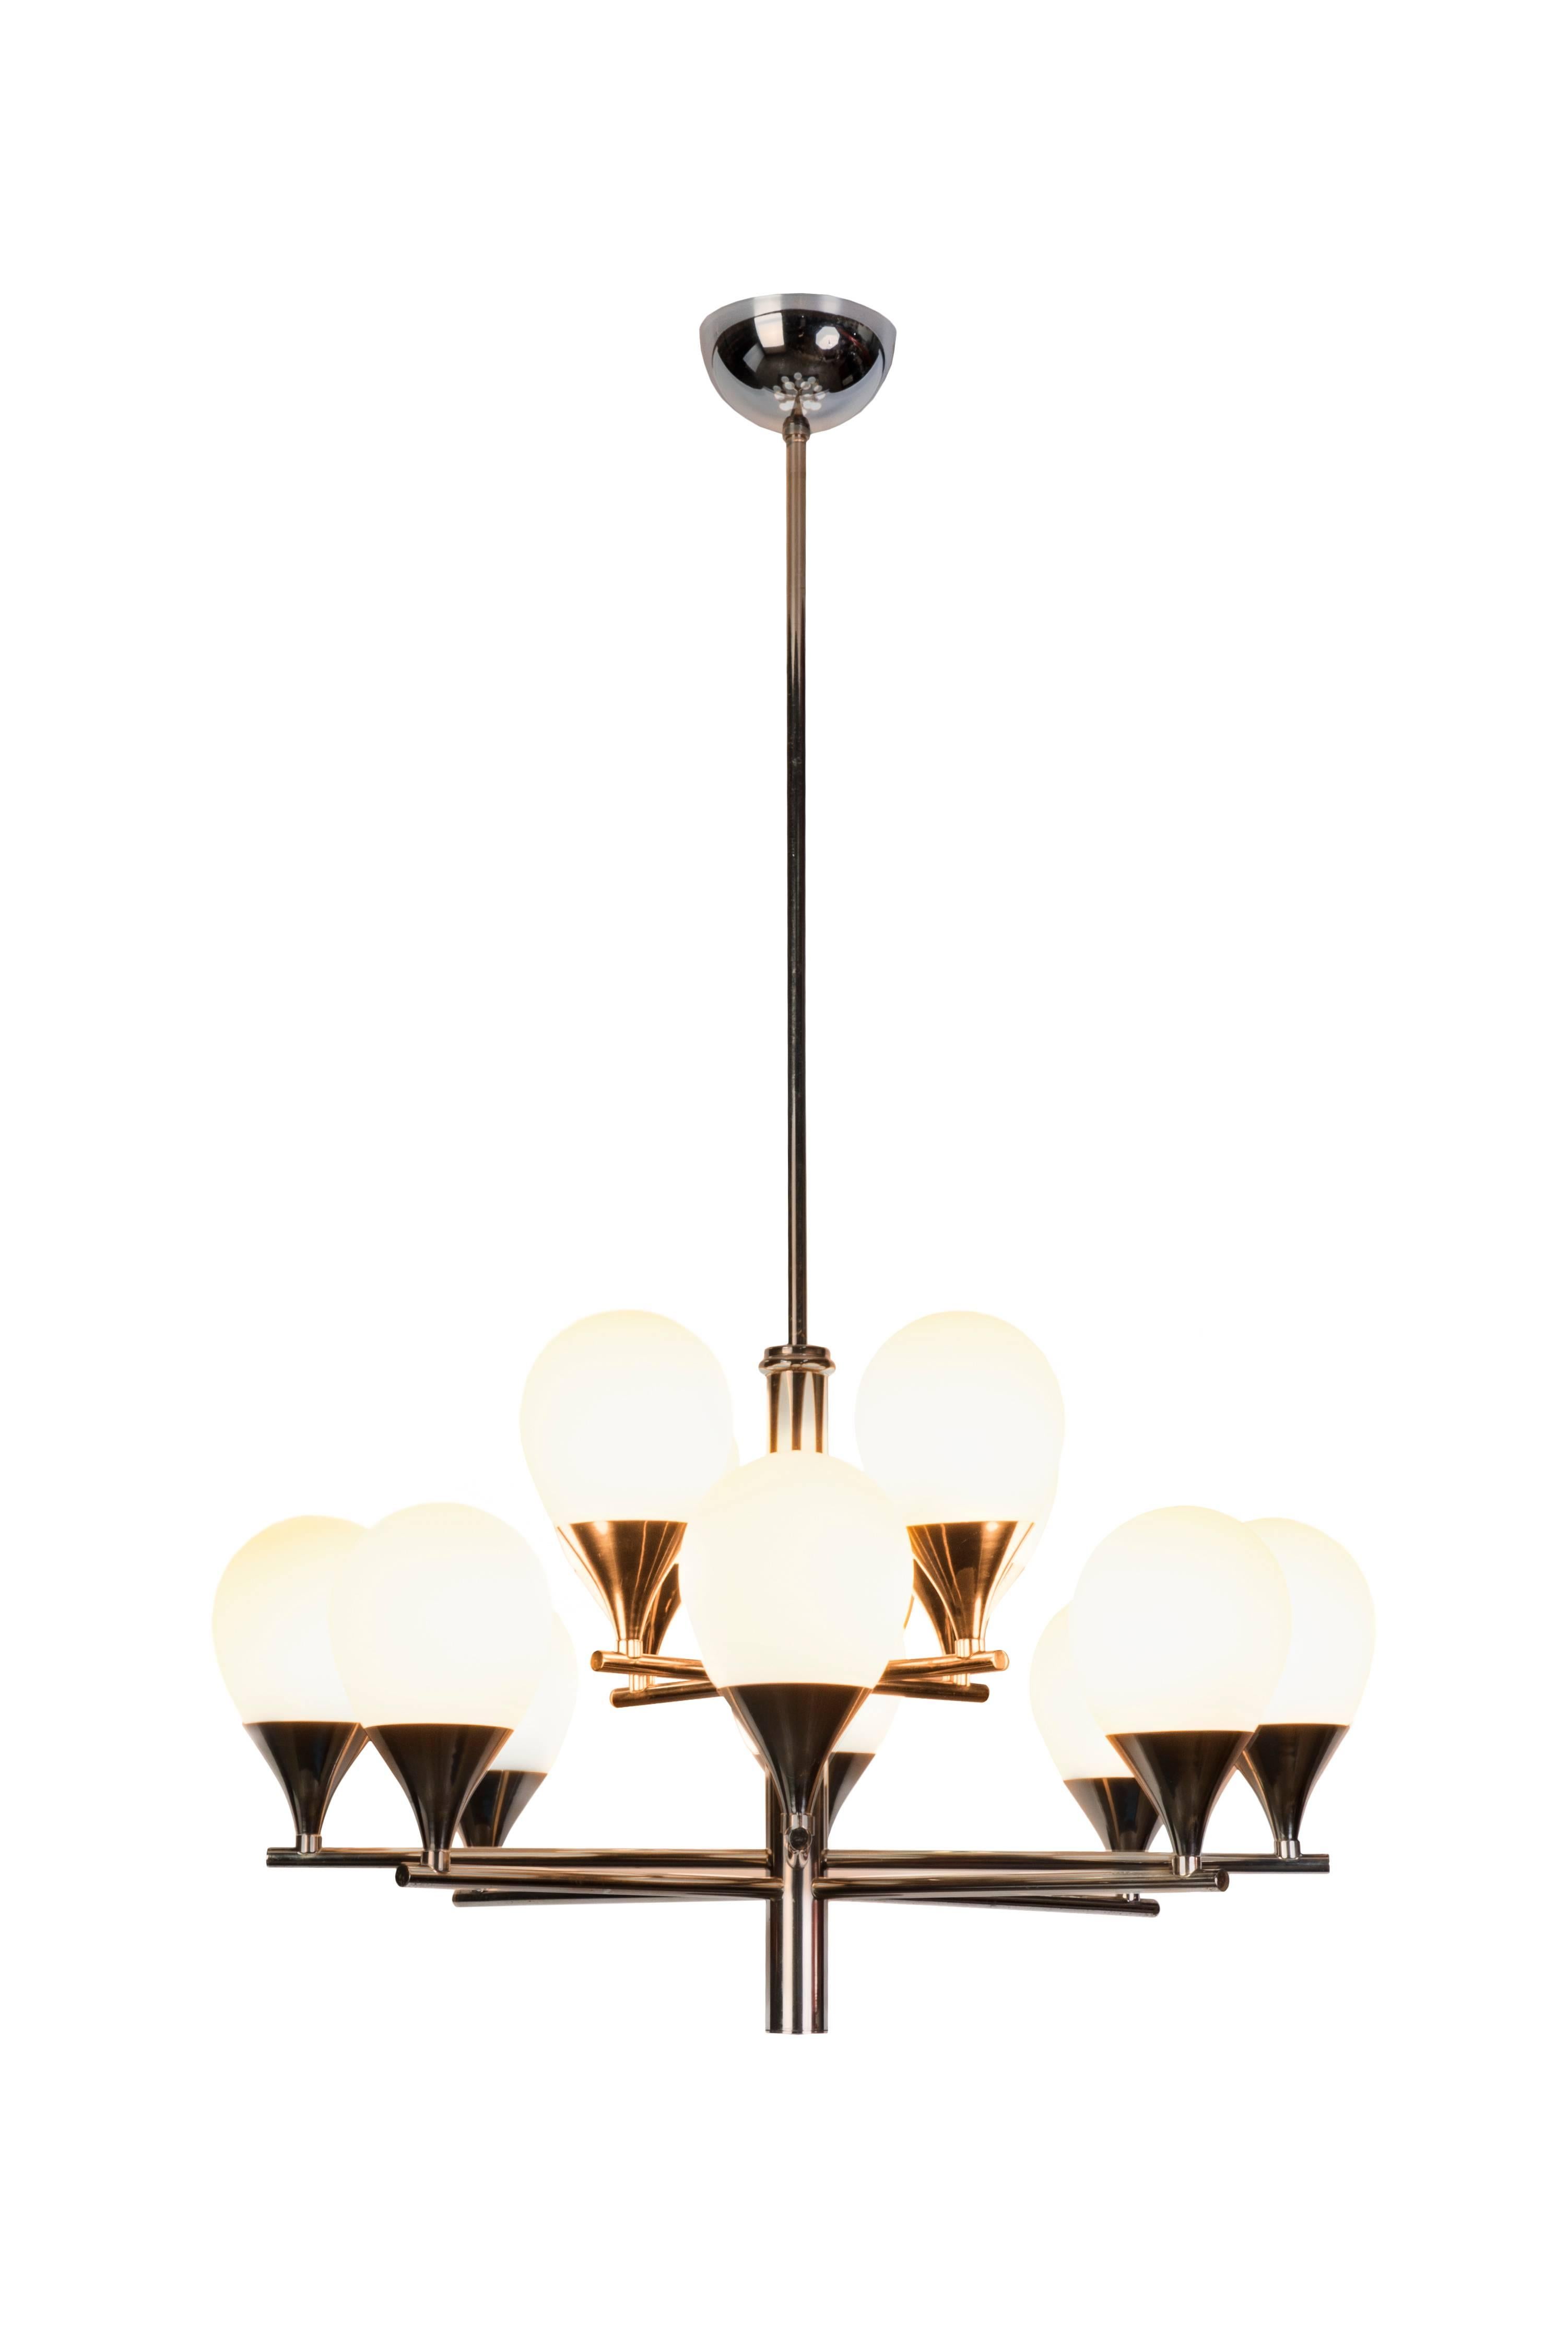 This gorgeous Mid-Century Modern chandelier features chromed brass frame that holds 12 double-layer opal glass shades distributed in two levels. Very straight light and simplistic in design.

Made in Italy, circa 1970.

Two available
Measures: